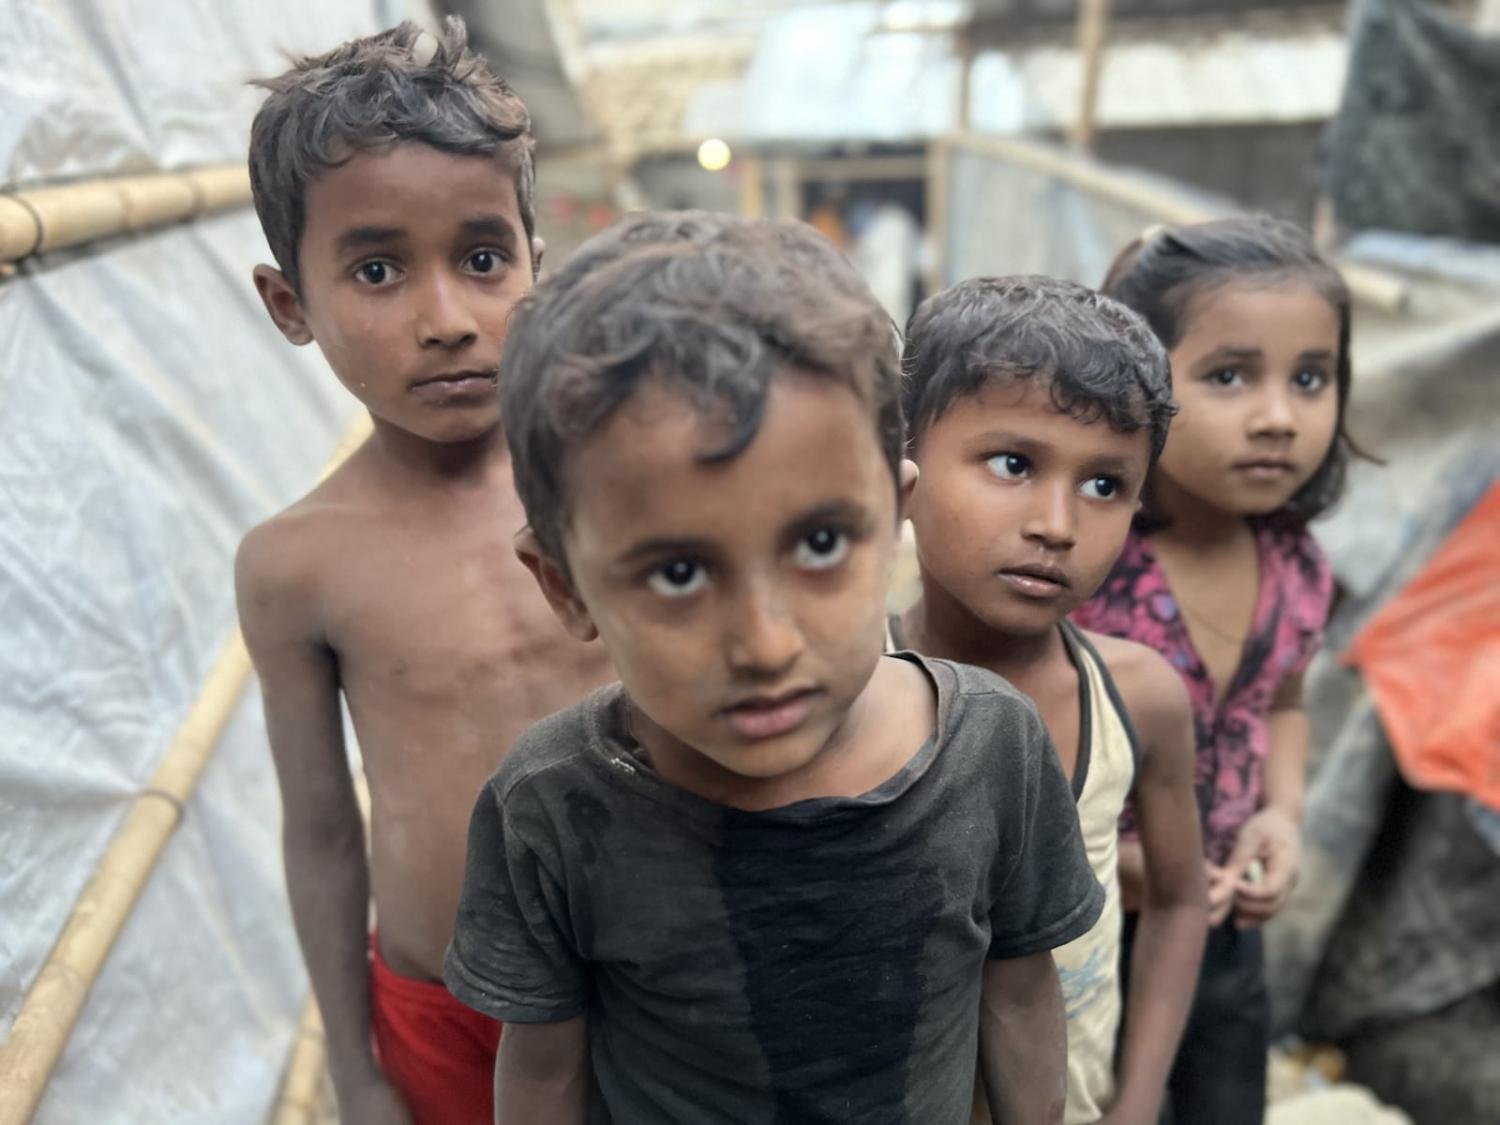 Children in the shanty town that is the refugee camp, Cox's Bazar, Bangladesh (Md. Kamruzzaman/Anadolu Agency via Getty Images)